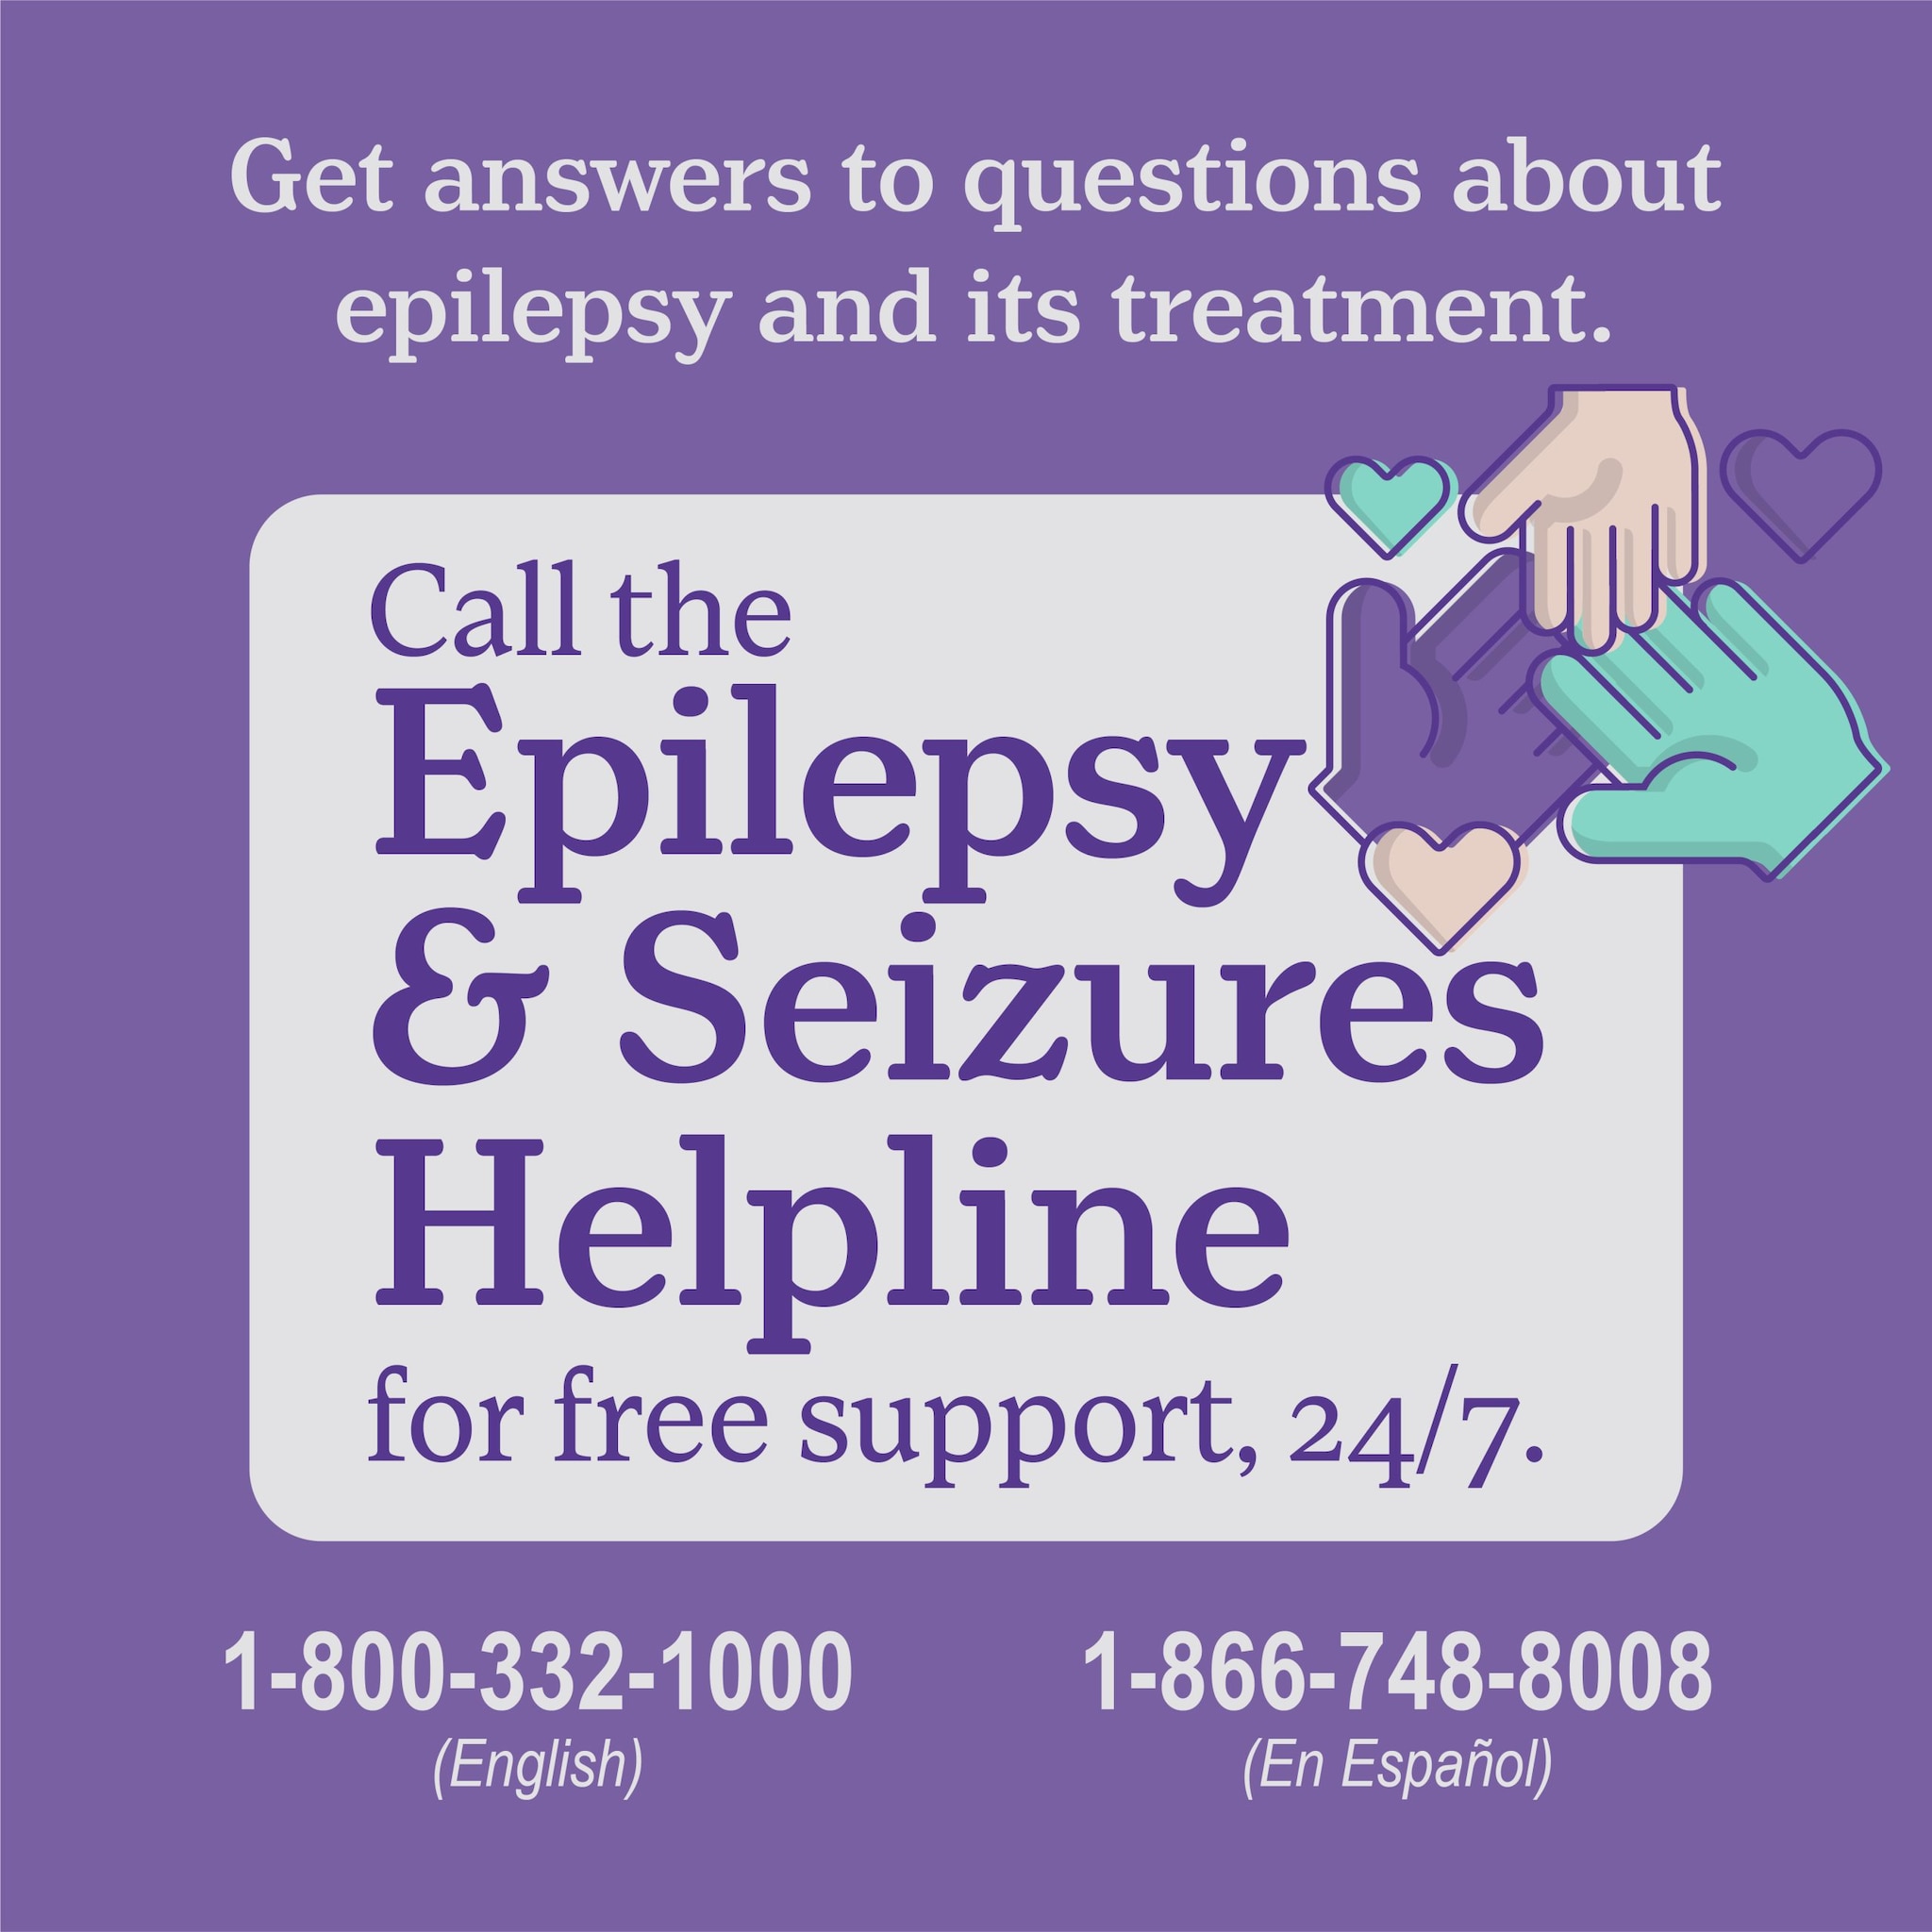 Get answers to questions about epilepsy and its treatment. Call the Epilepsy & Seizures Helpline for free support, 24/7. 1-800-332-1000 (English) 1-866-748-8008 (En Espanol)